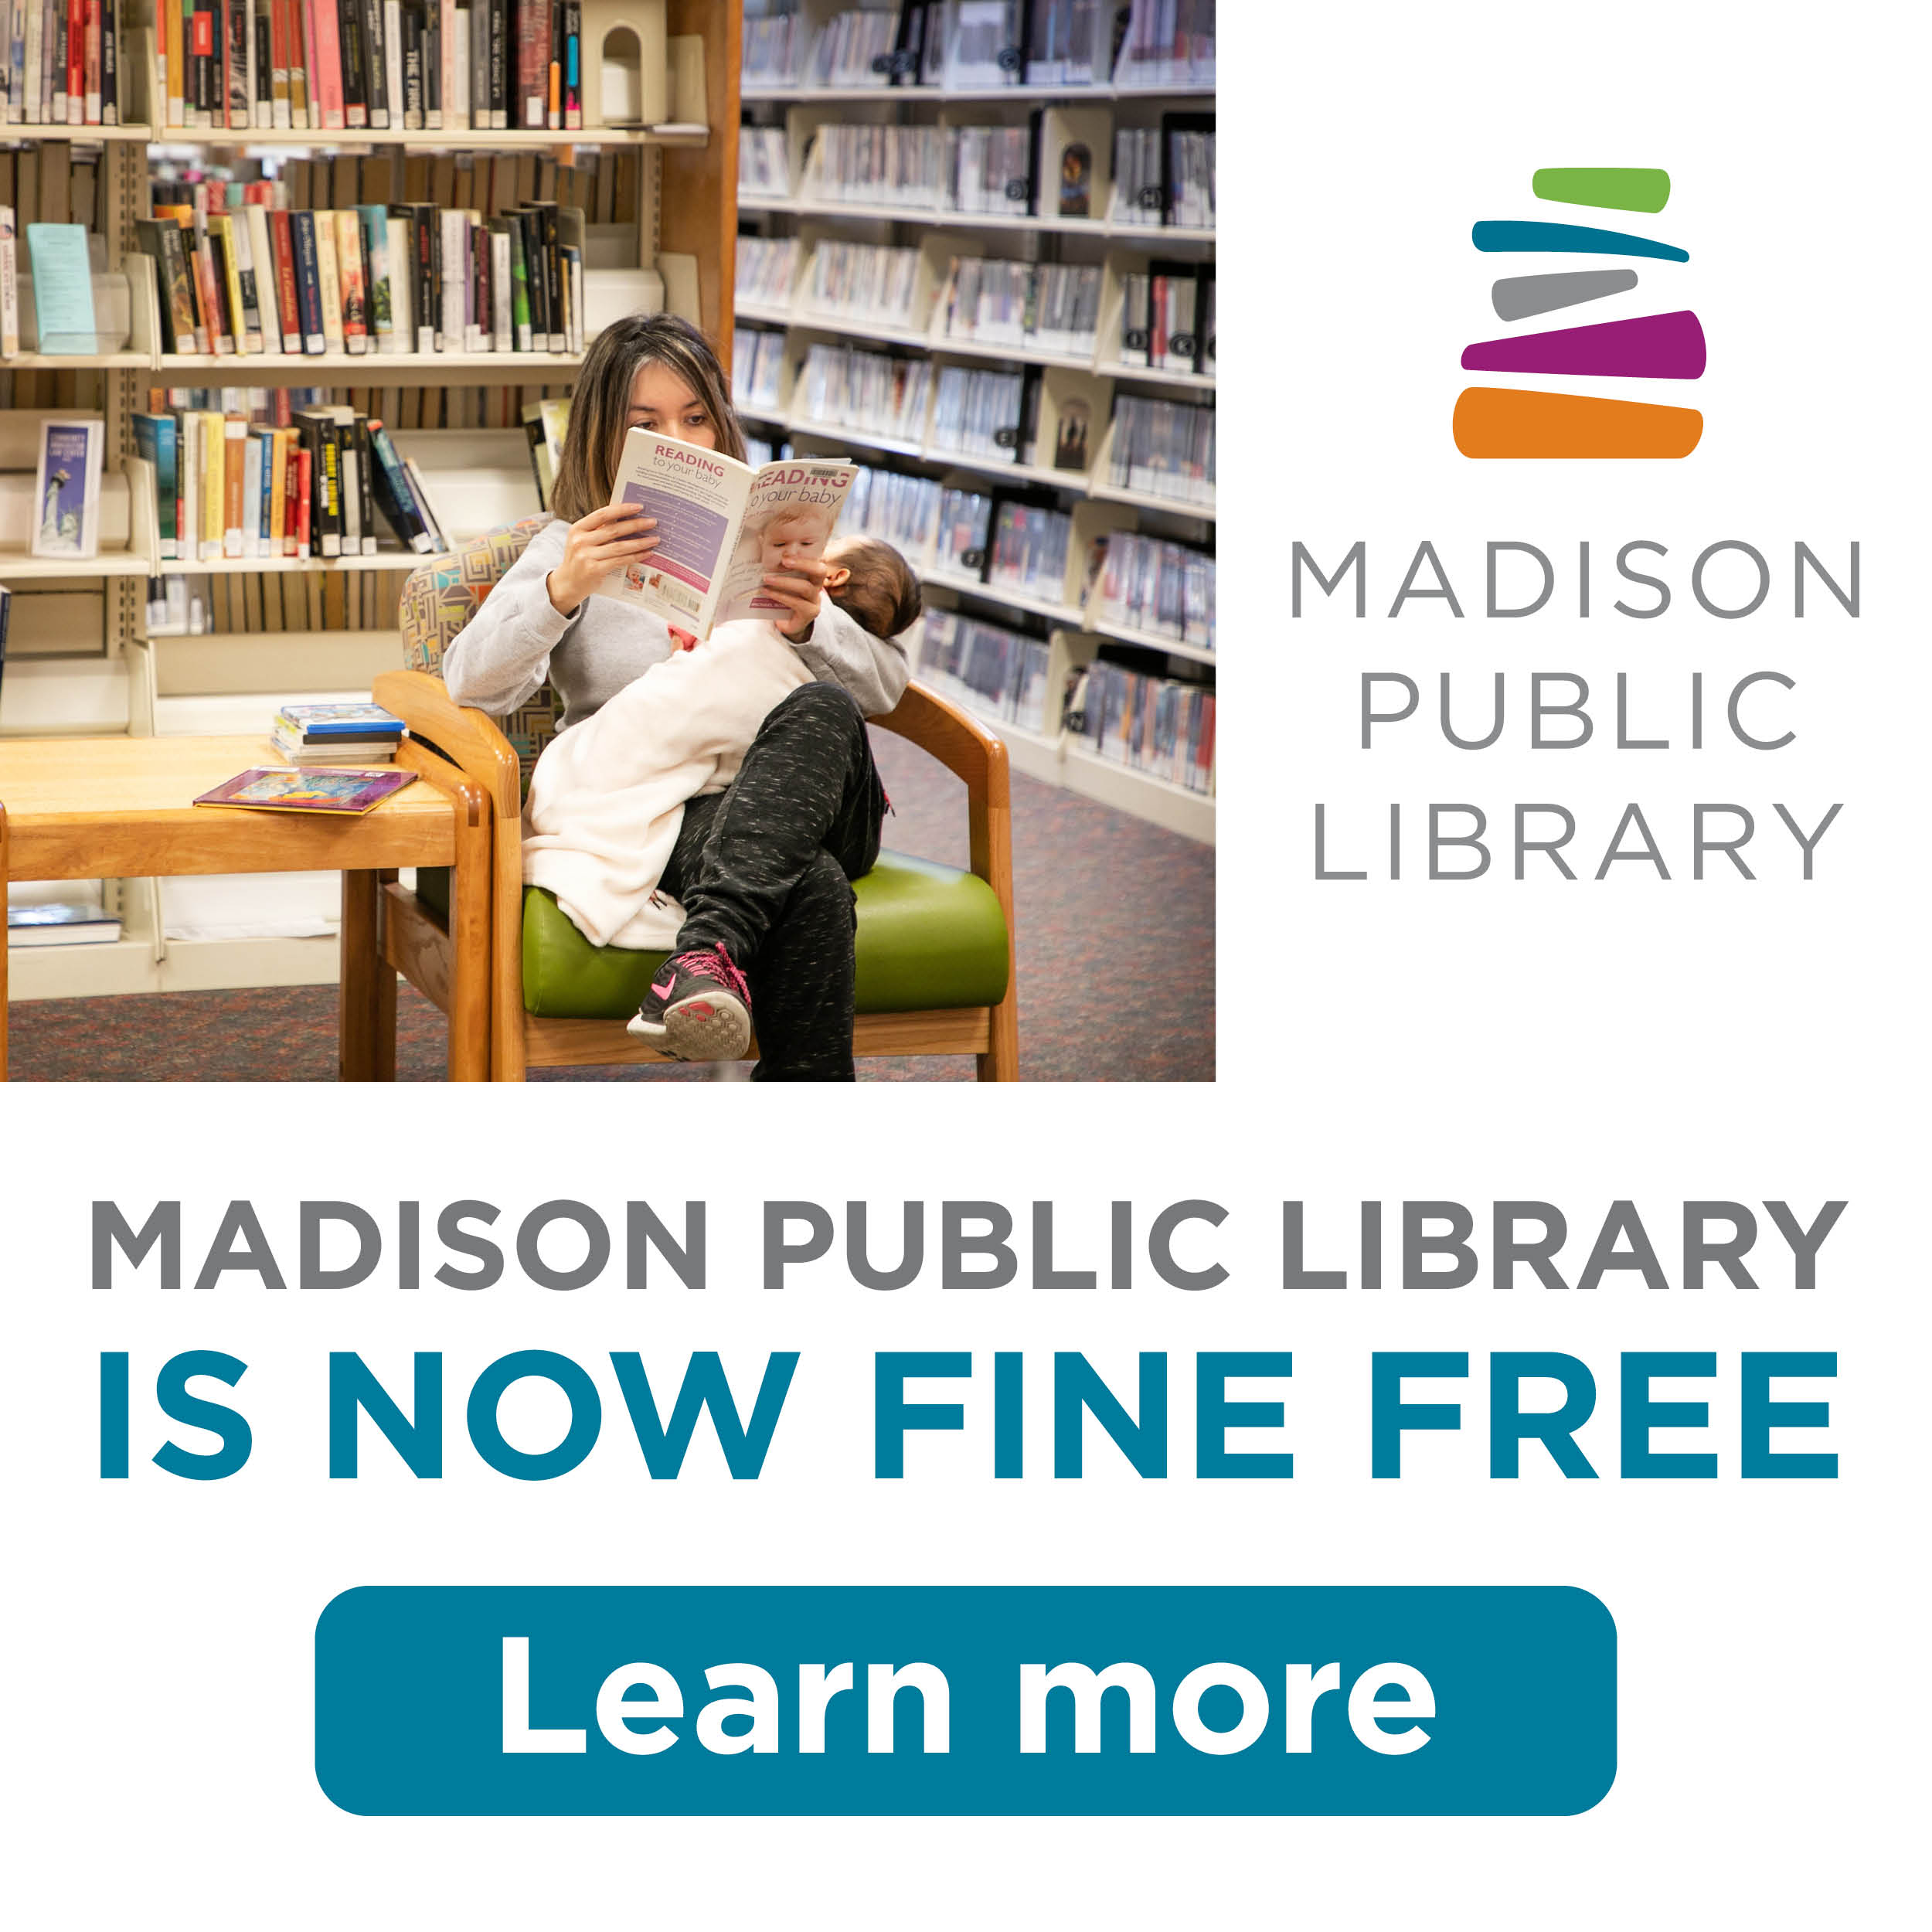 Madison Public Library has made the decision to go Fine Free